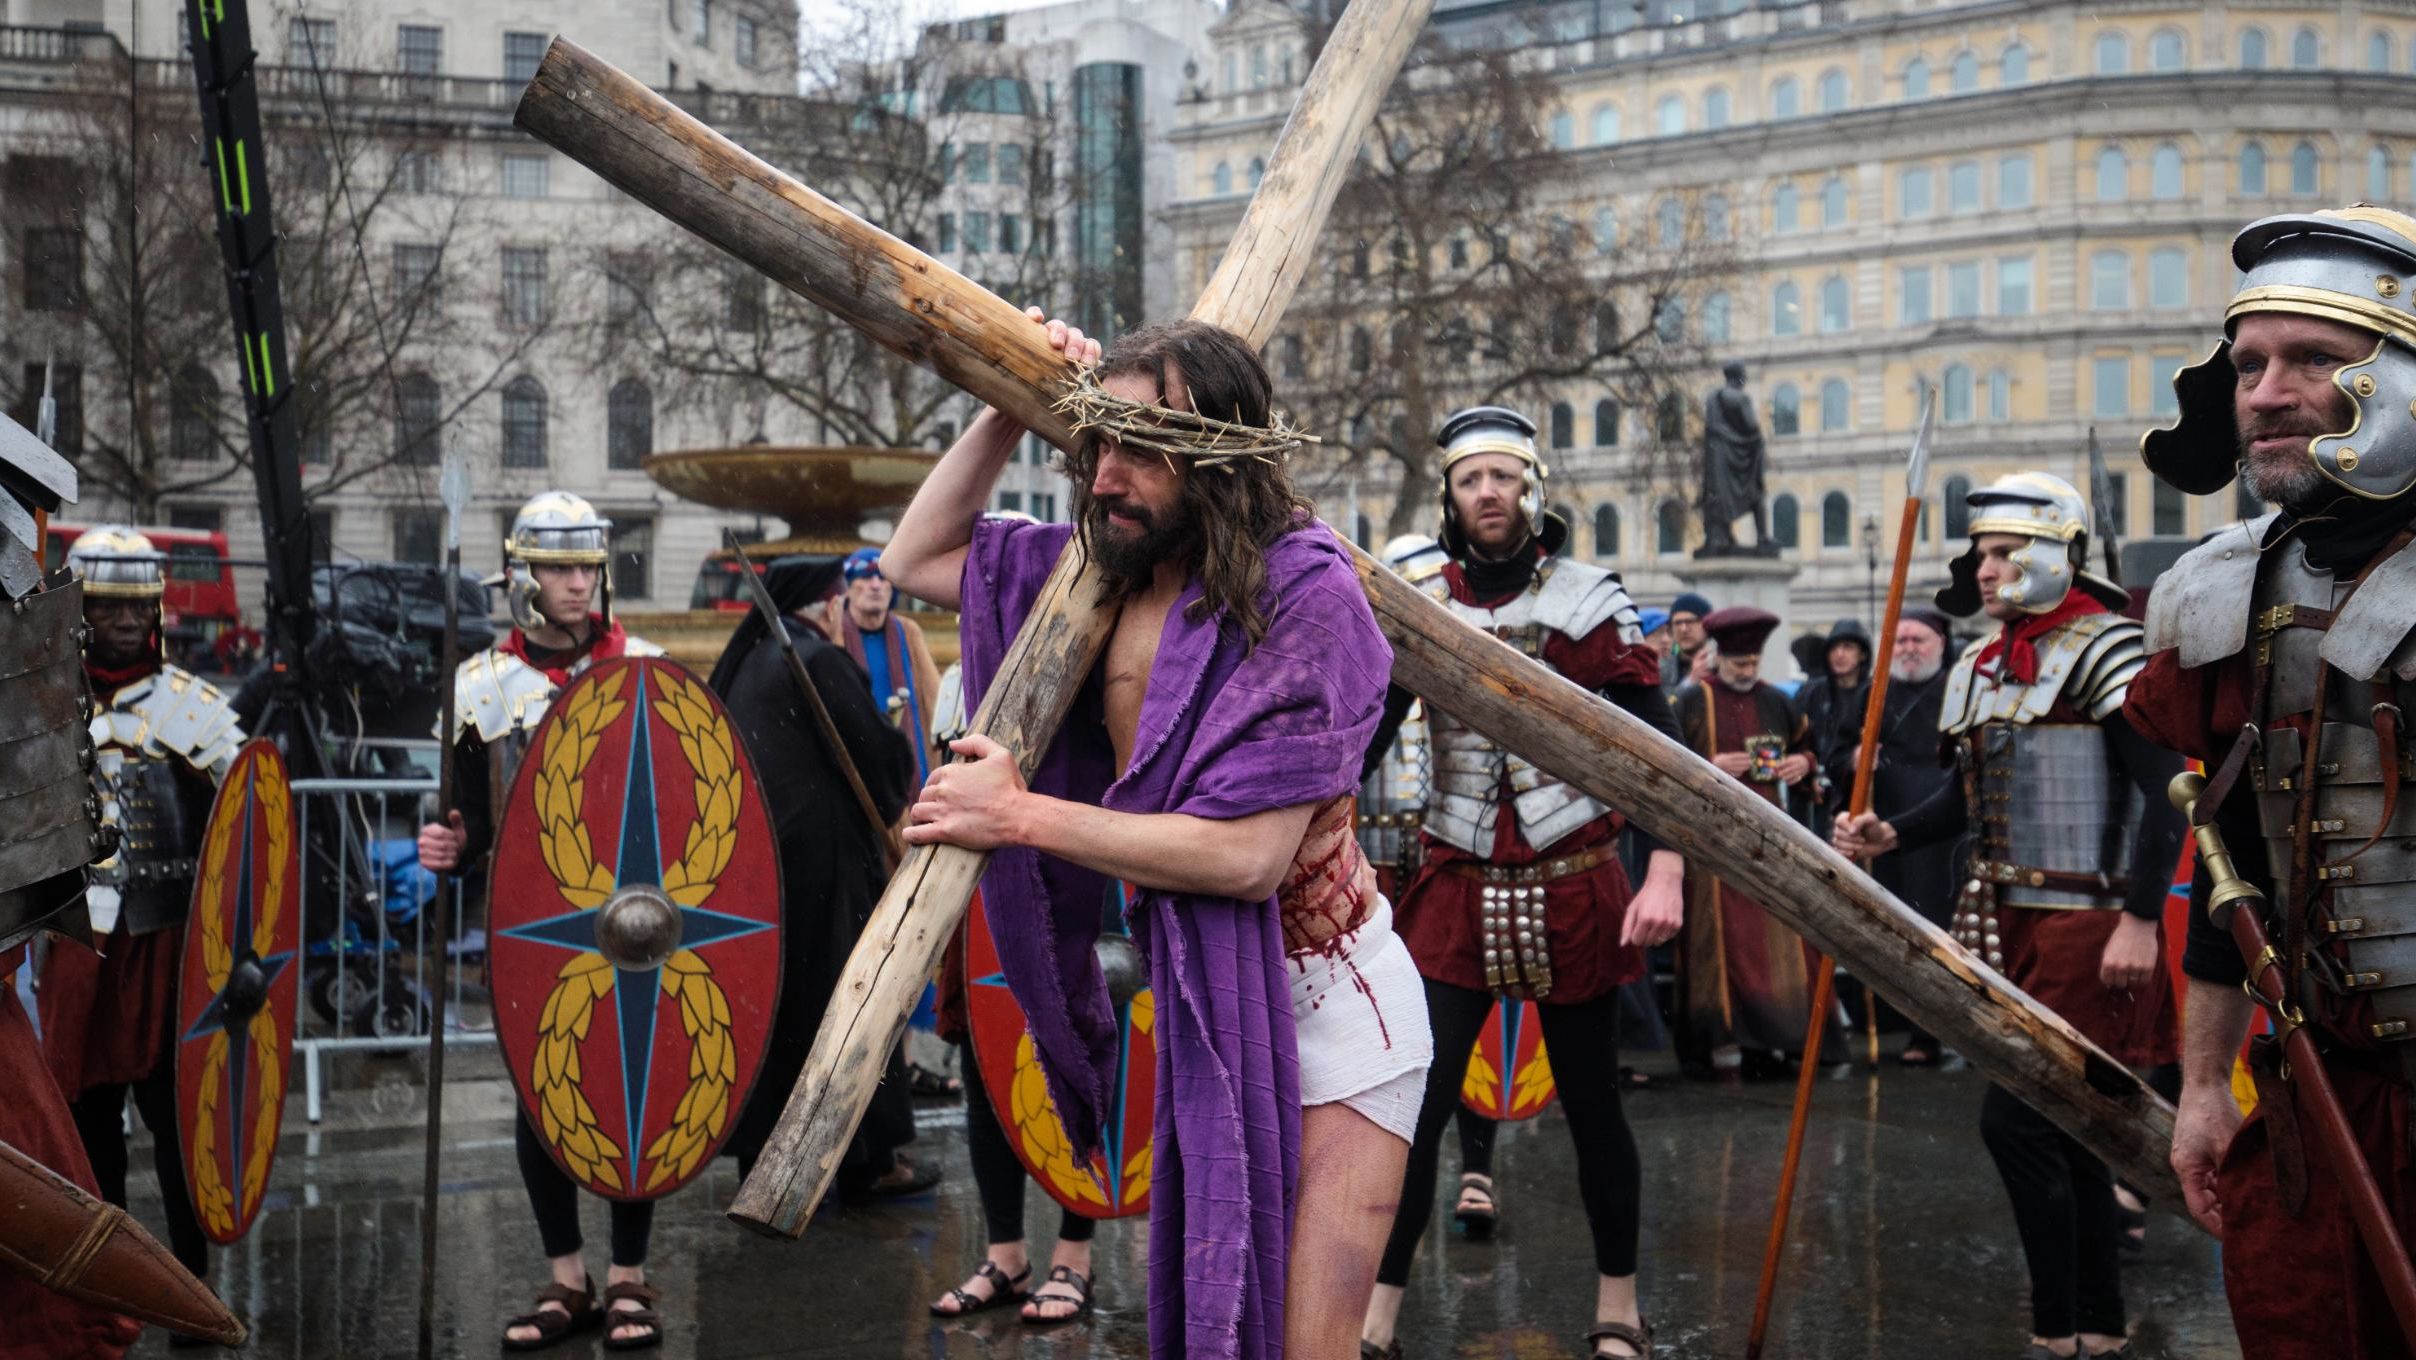 The Wintershall players perform "The Passion of Jesus" in front of crowds in Trafalgar Square.